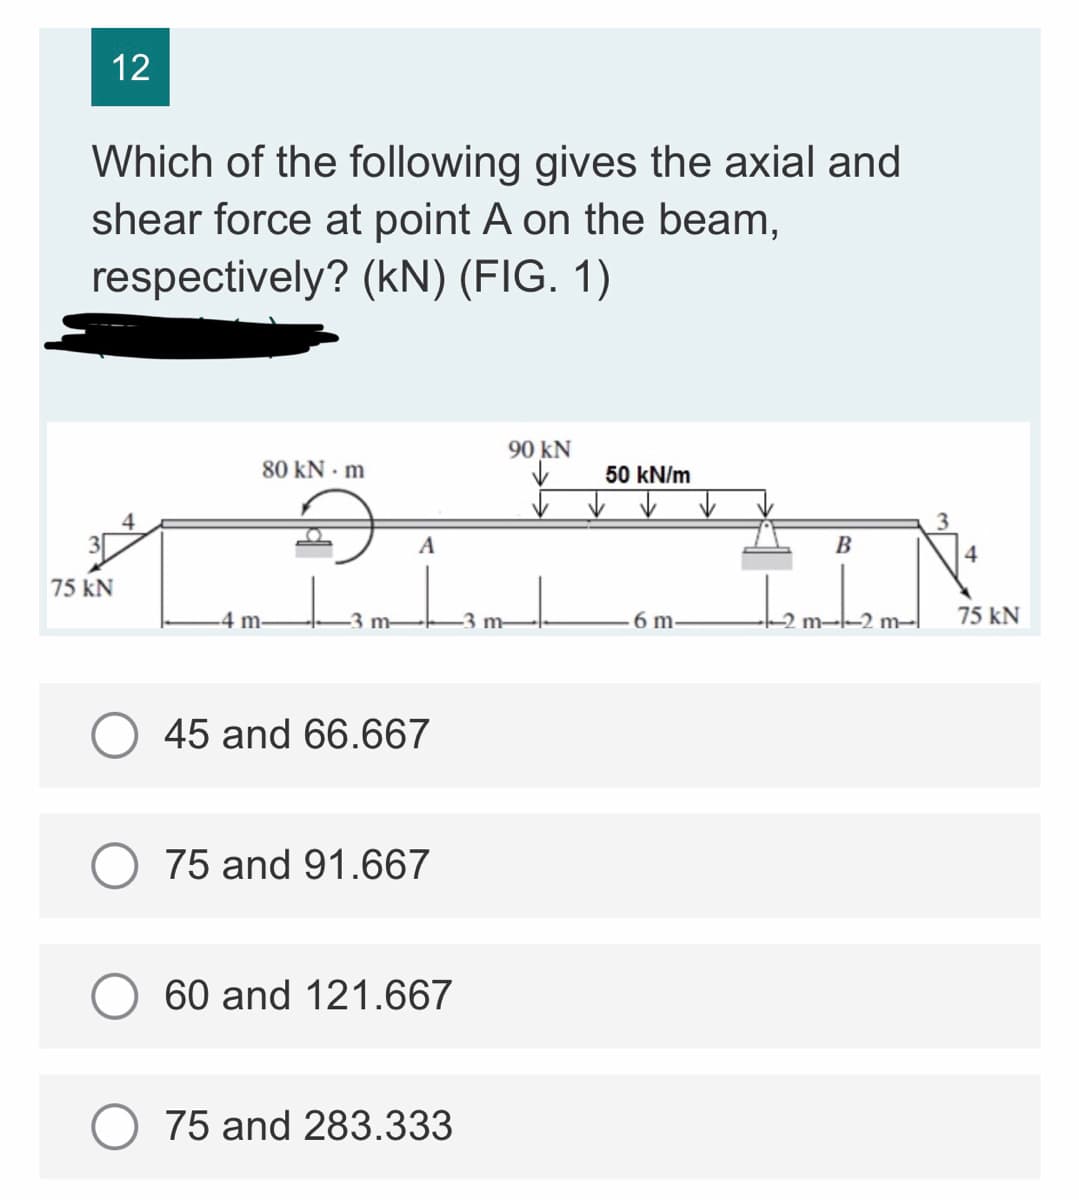 12
Which of the following gives the axial and
shear force at point A on the beam,
respectively? (kN) (FIG. 1)
90 KN
80 KN - m
4
3
4
75 kN
A
₂
-4 m-
45 and 66.667
75 and 91.667
60 and 121.667
75 and 283.333
m-
50 kN/m
6 m-
B
tembe
m-l
75 kN